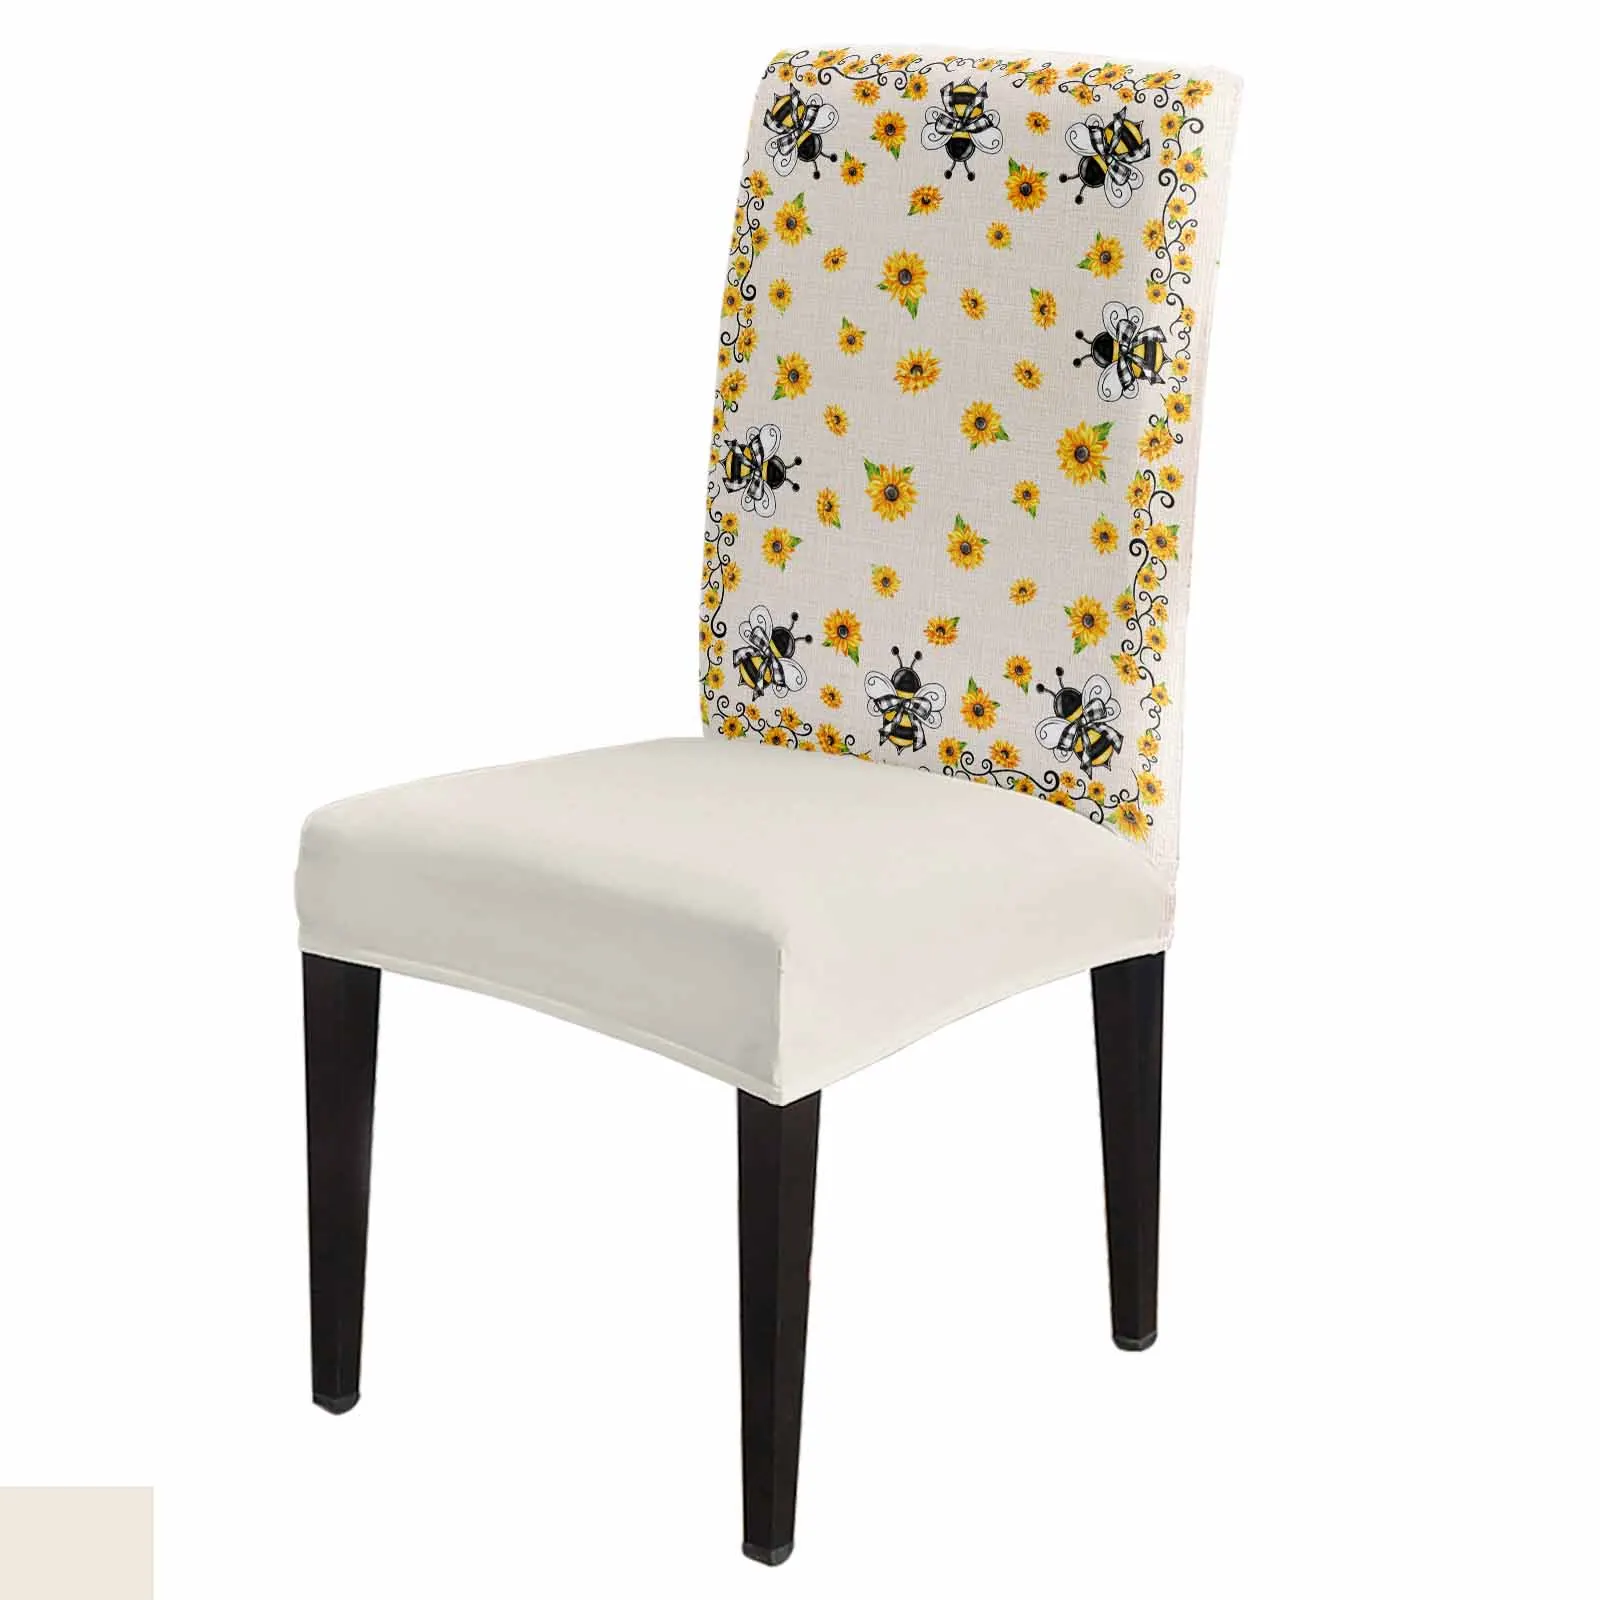 

Summer Bee Sunflower Flower Dining Chair Covers Spandex Stretch Seat Cover for Wedding Kitchen Banquet Party Seat Case